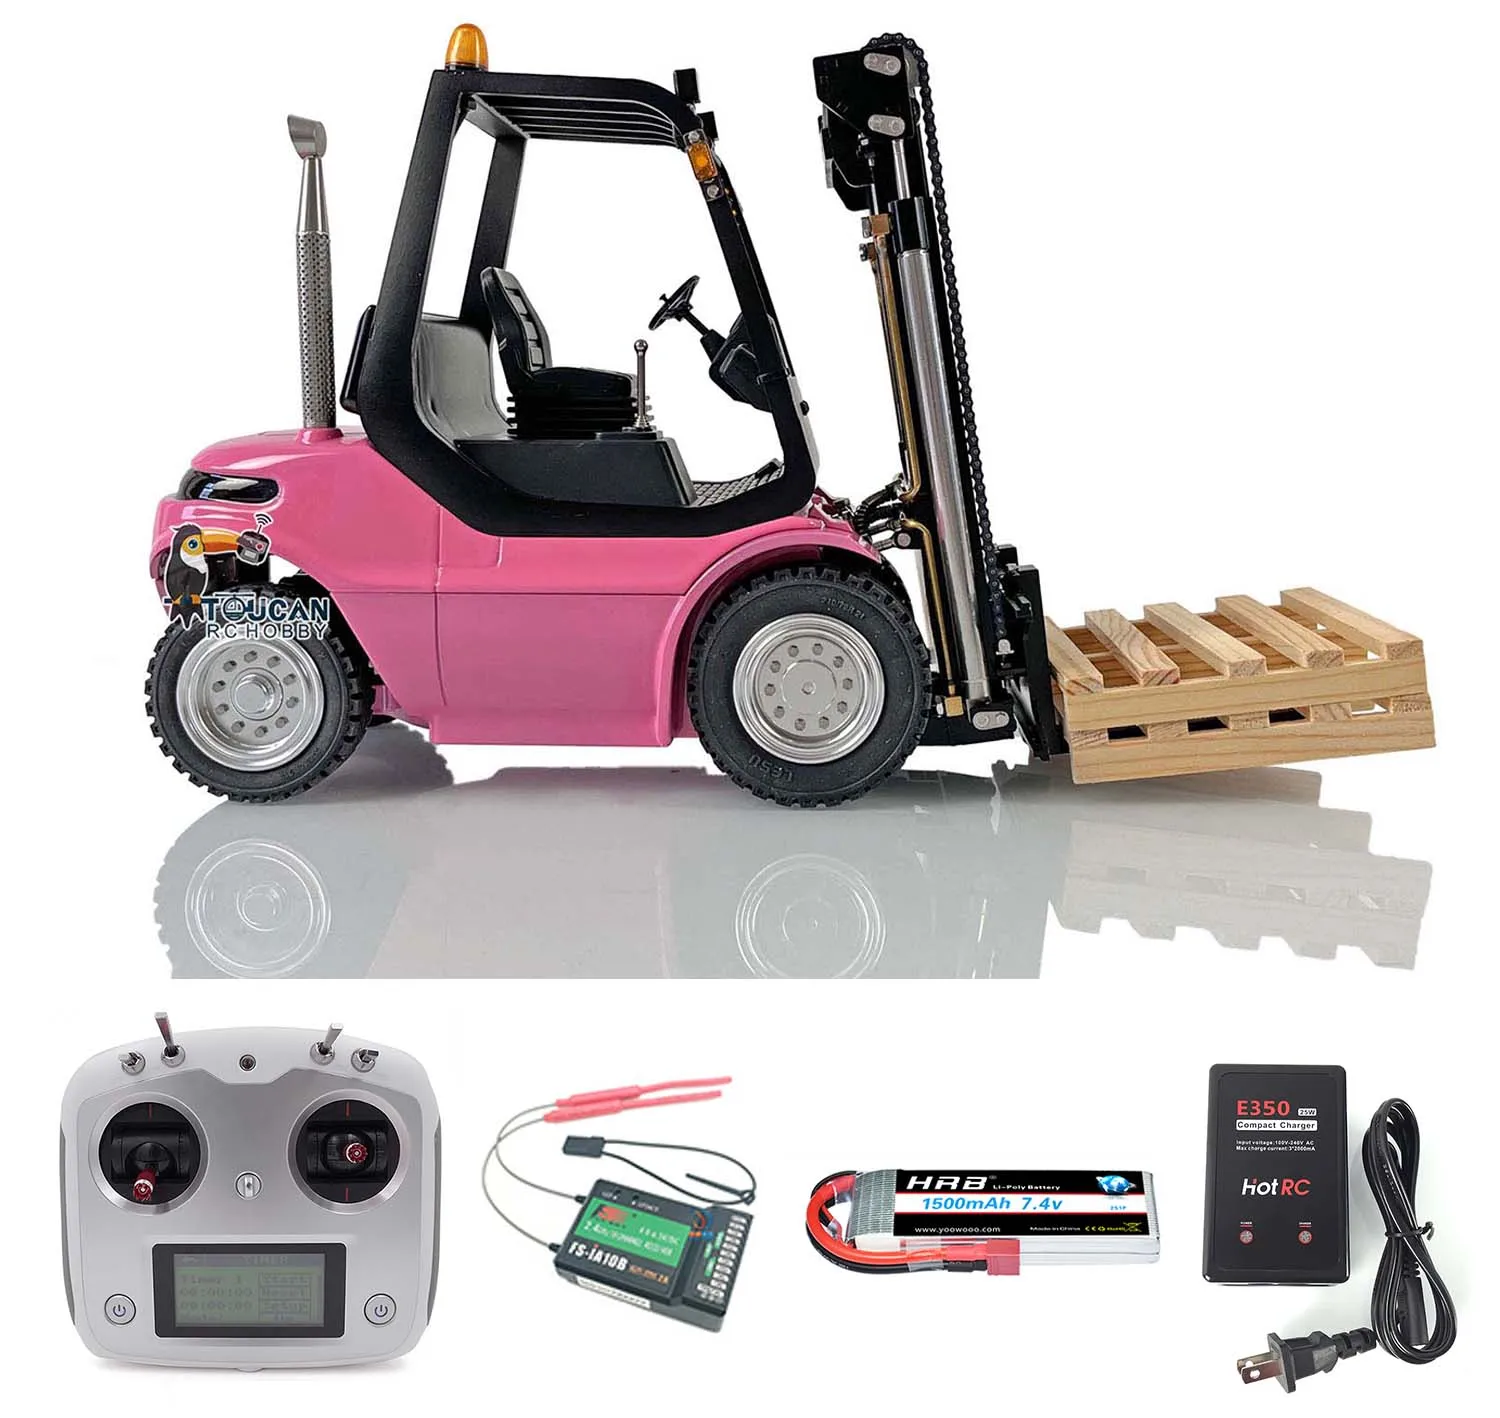 

Lesu Rc Hydraulic Forklift 1/14 Transfer Car Valve Esc Sound Light Assembled And Painted Toucan Remoted Toy Thzh1343-Smt8